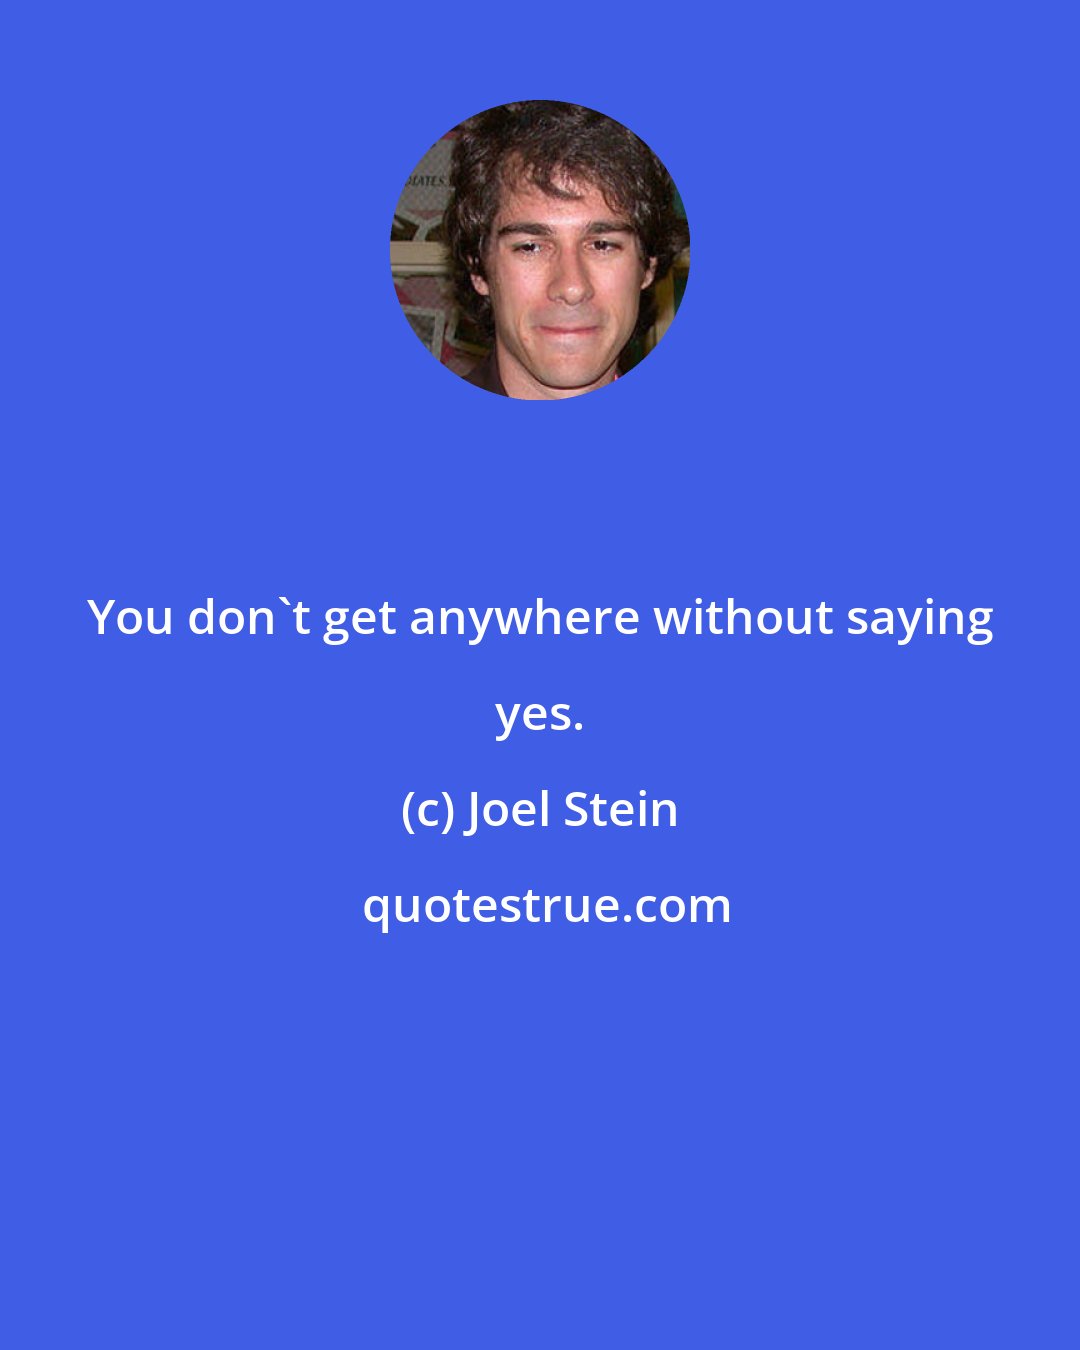 Joel Stein: You don't get anywhere without saying yes.